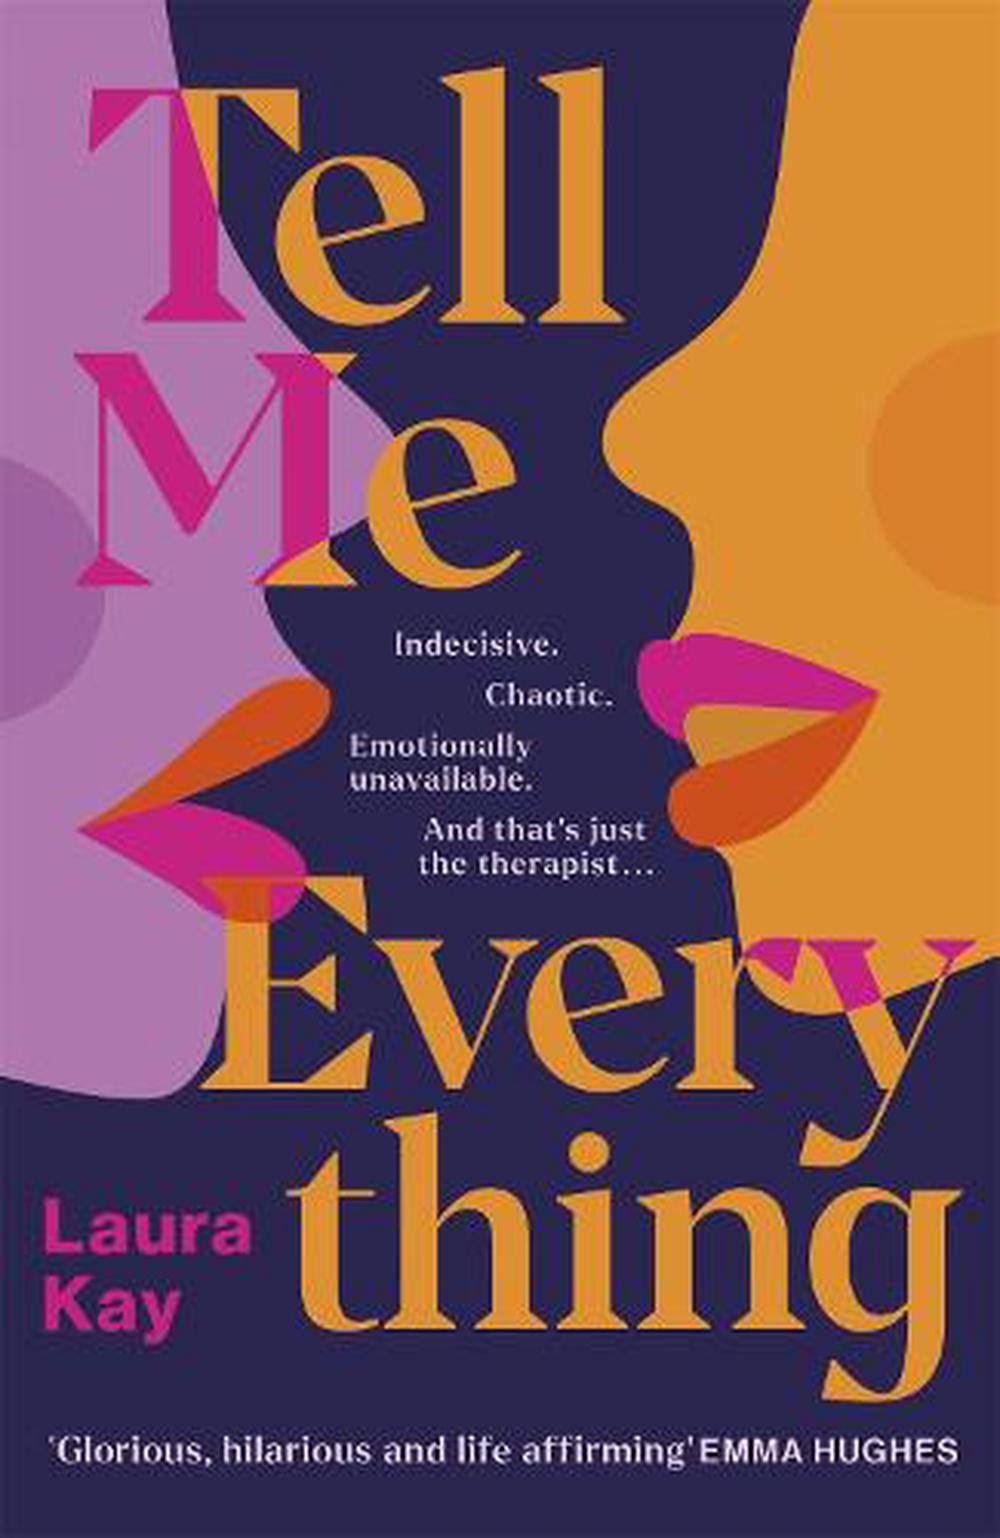 Tell Me Everything [Book]